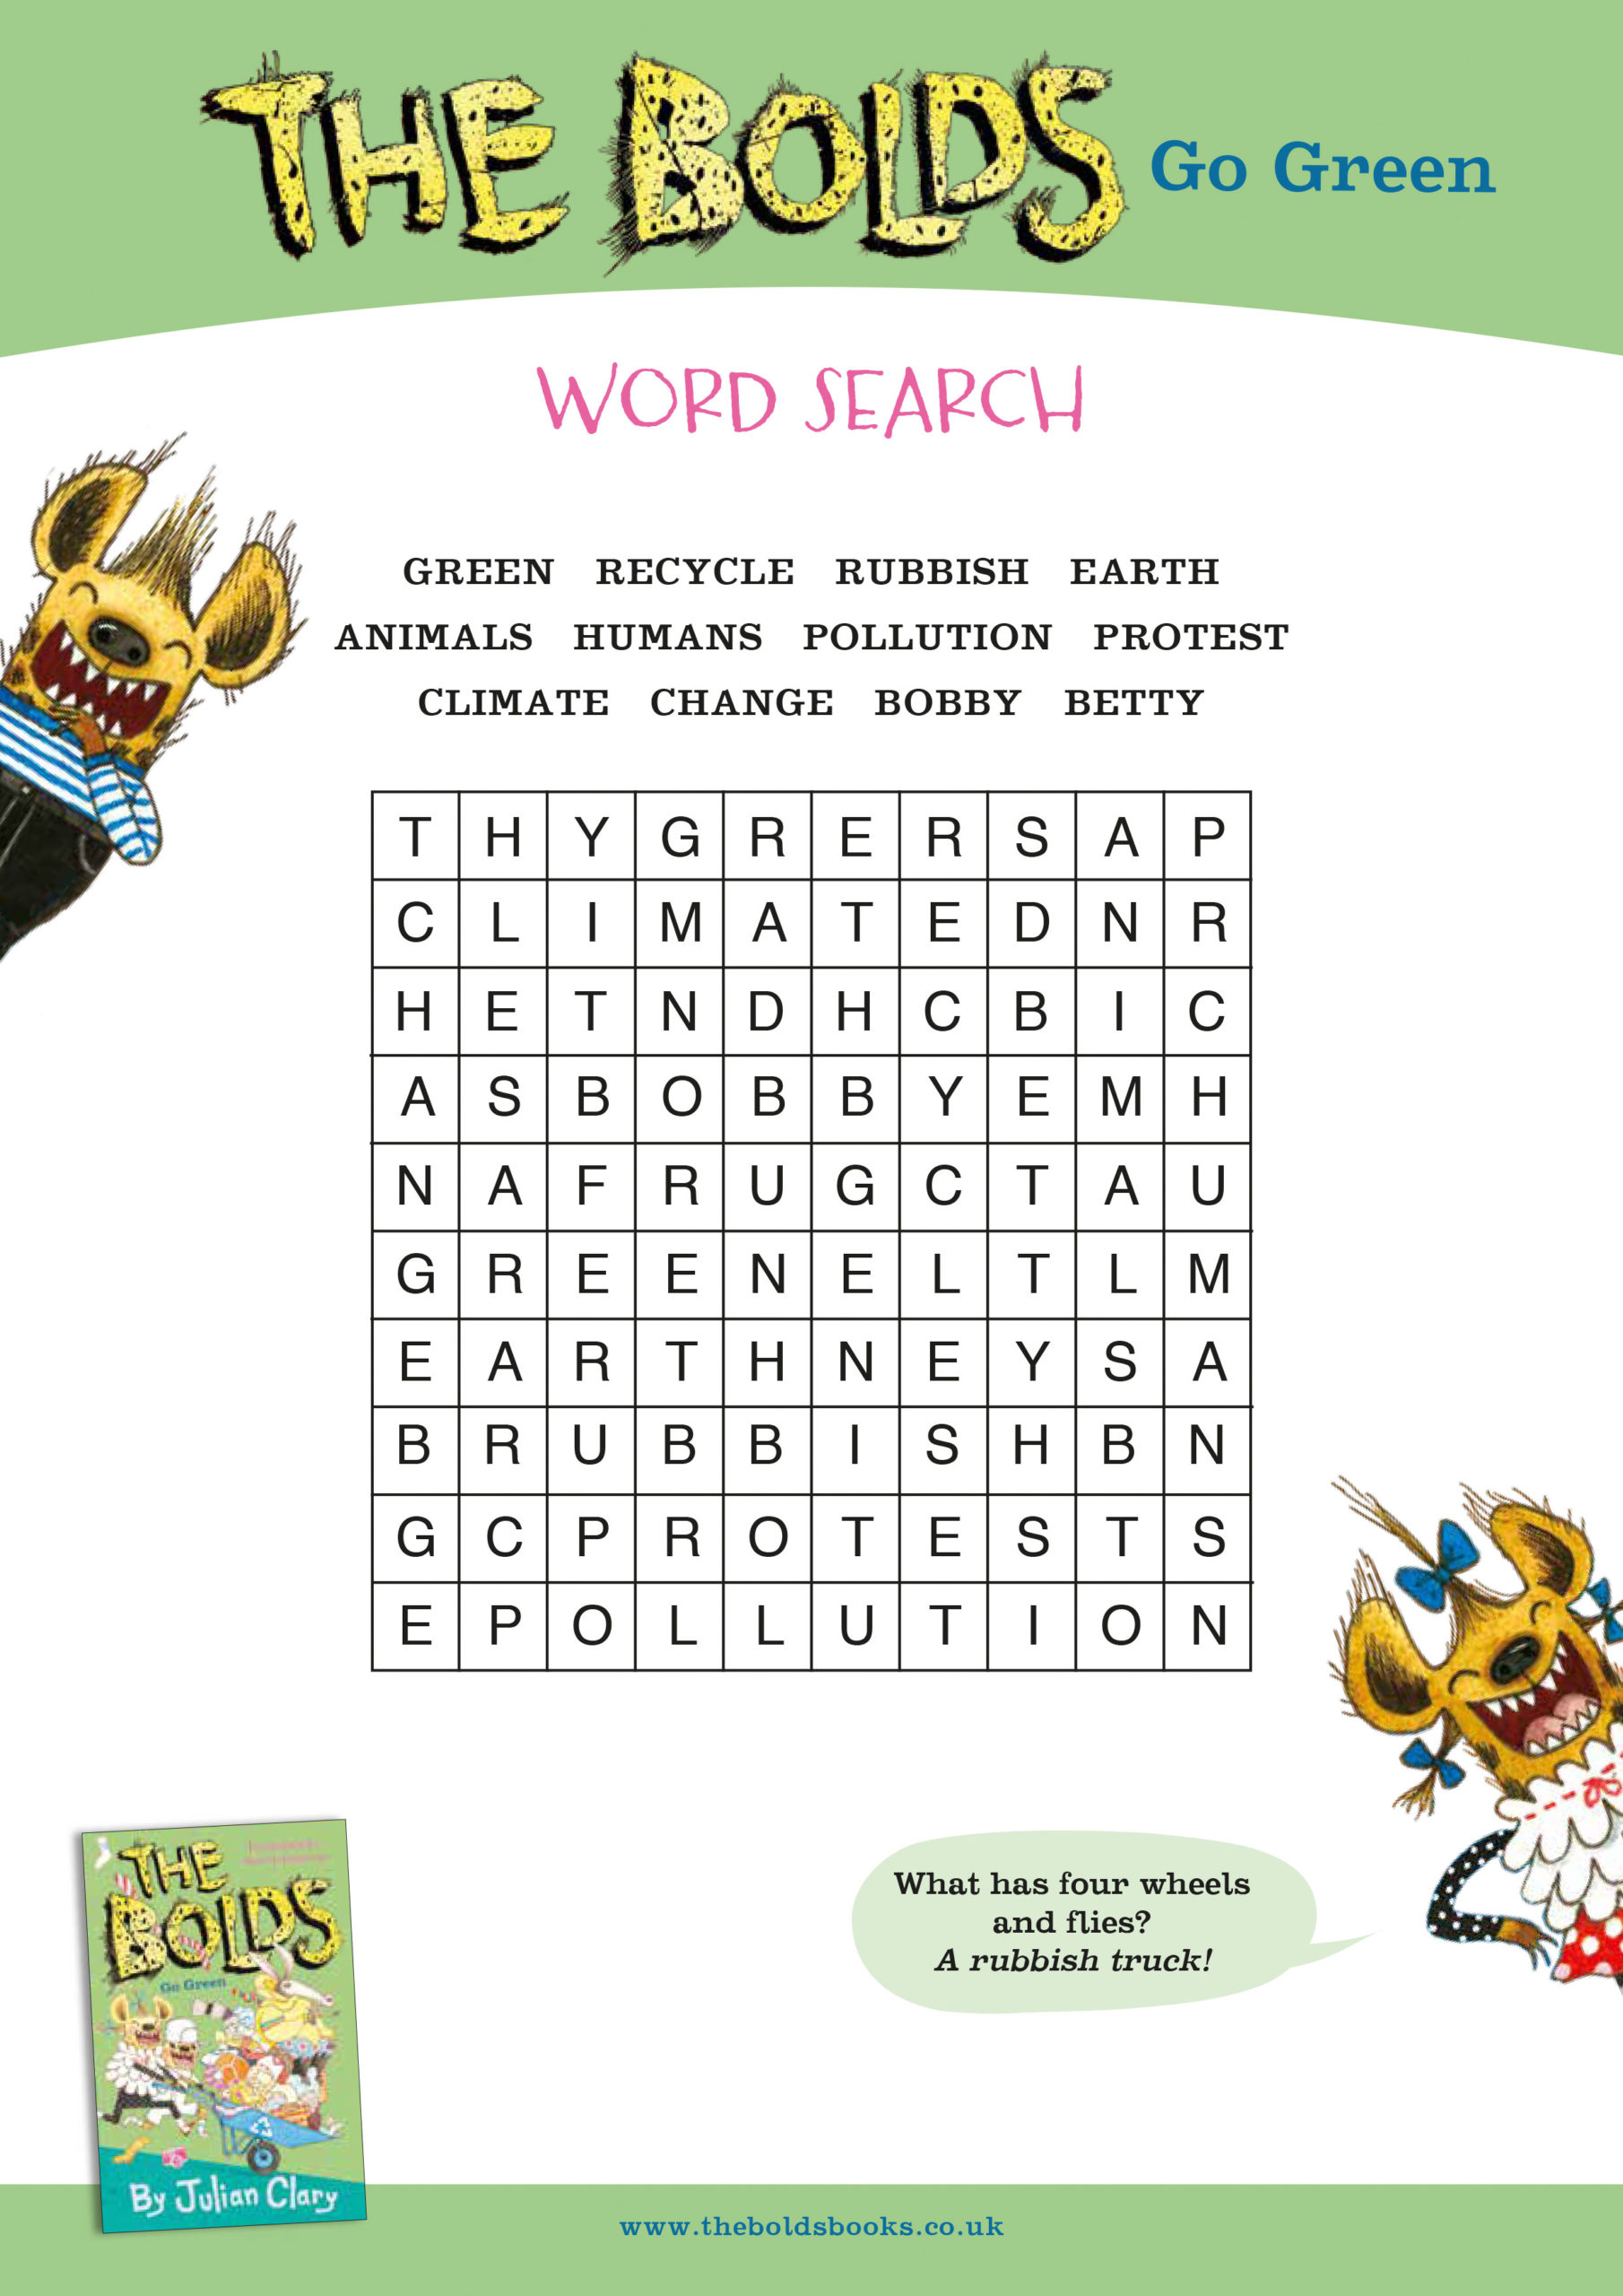 Go Green Word Search